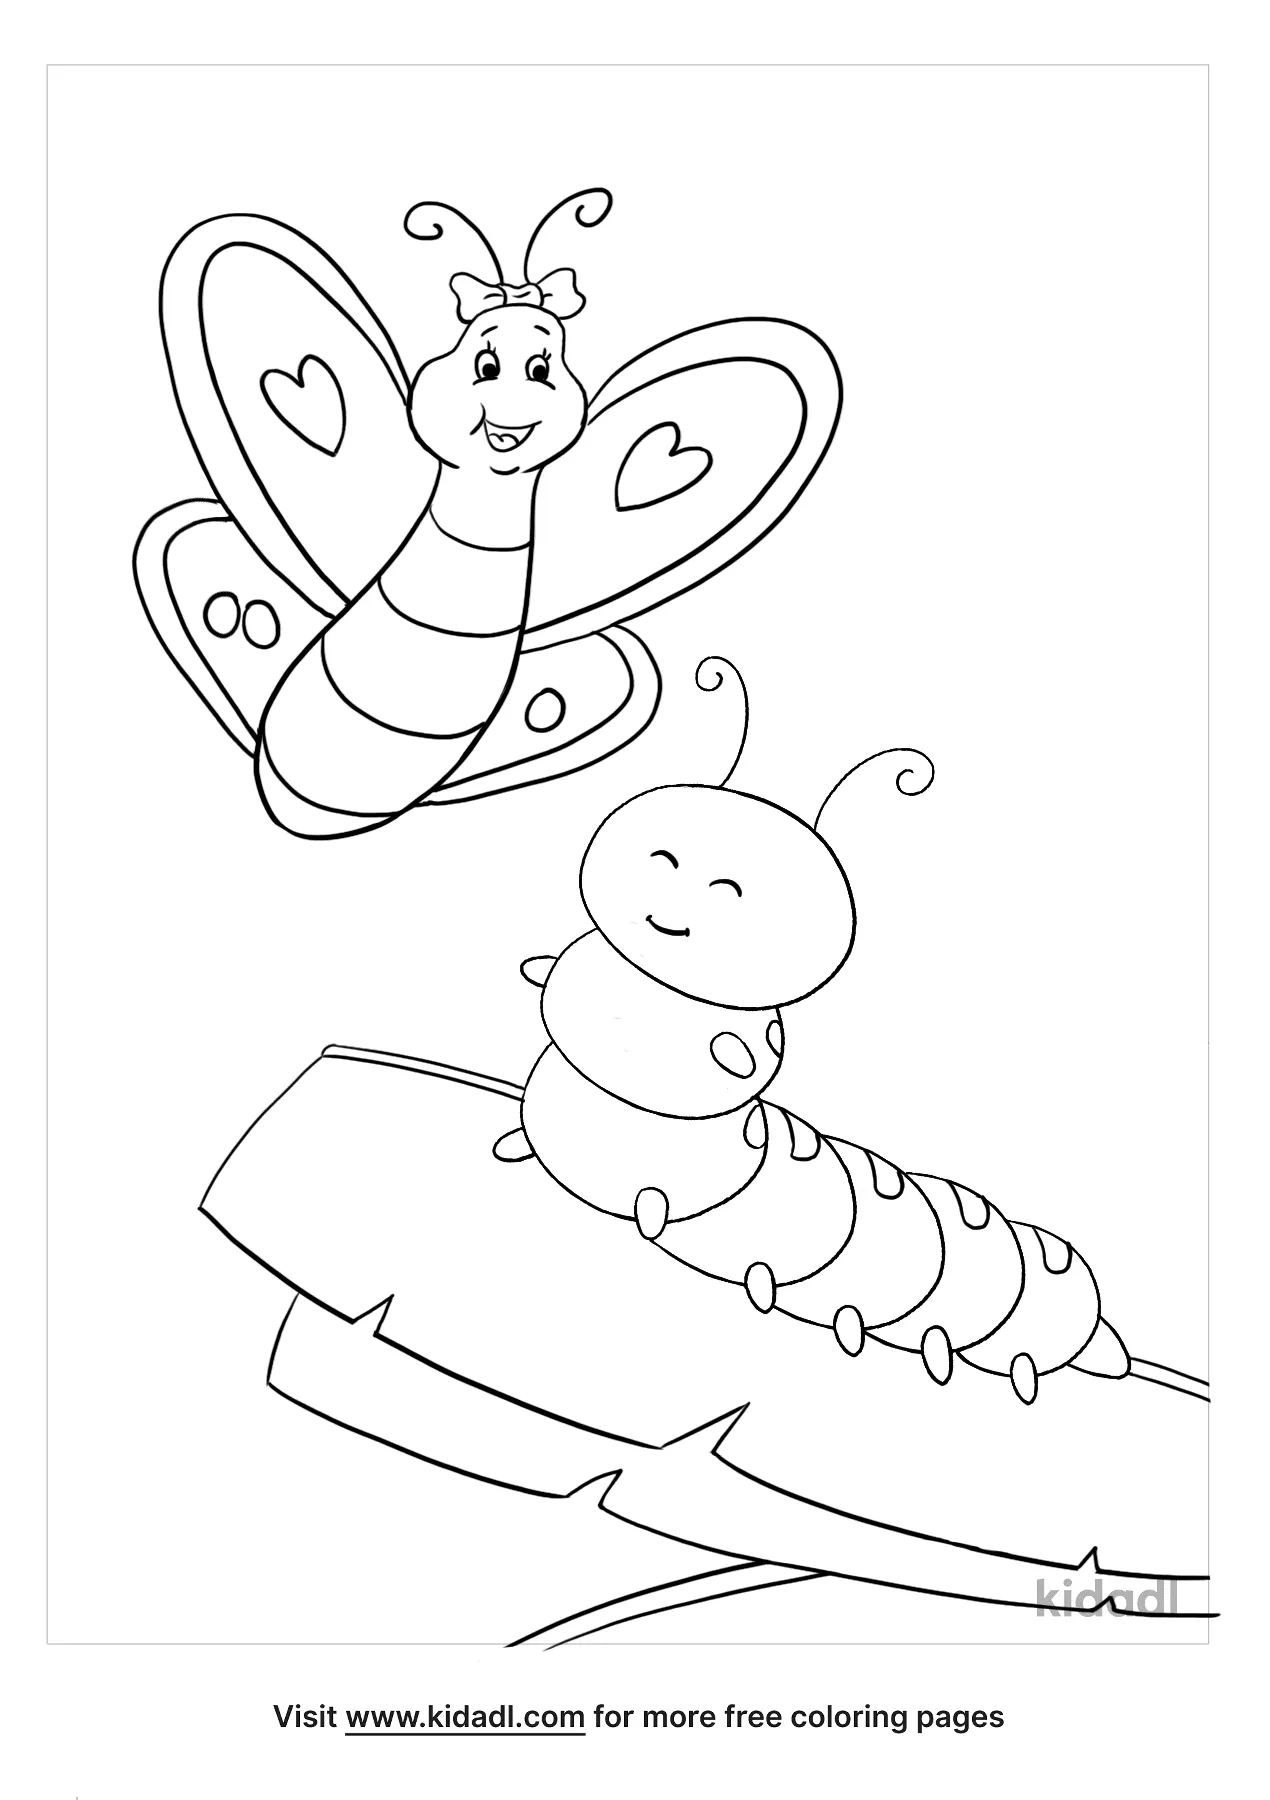 Caterpillar To Butterfly Coloring Pages   Free Bugs Coloring Pages ...